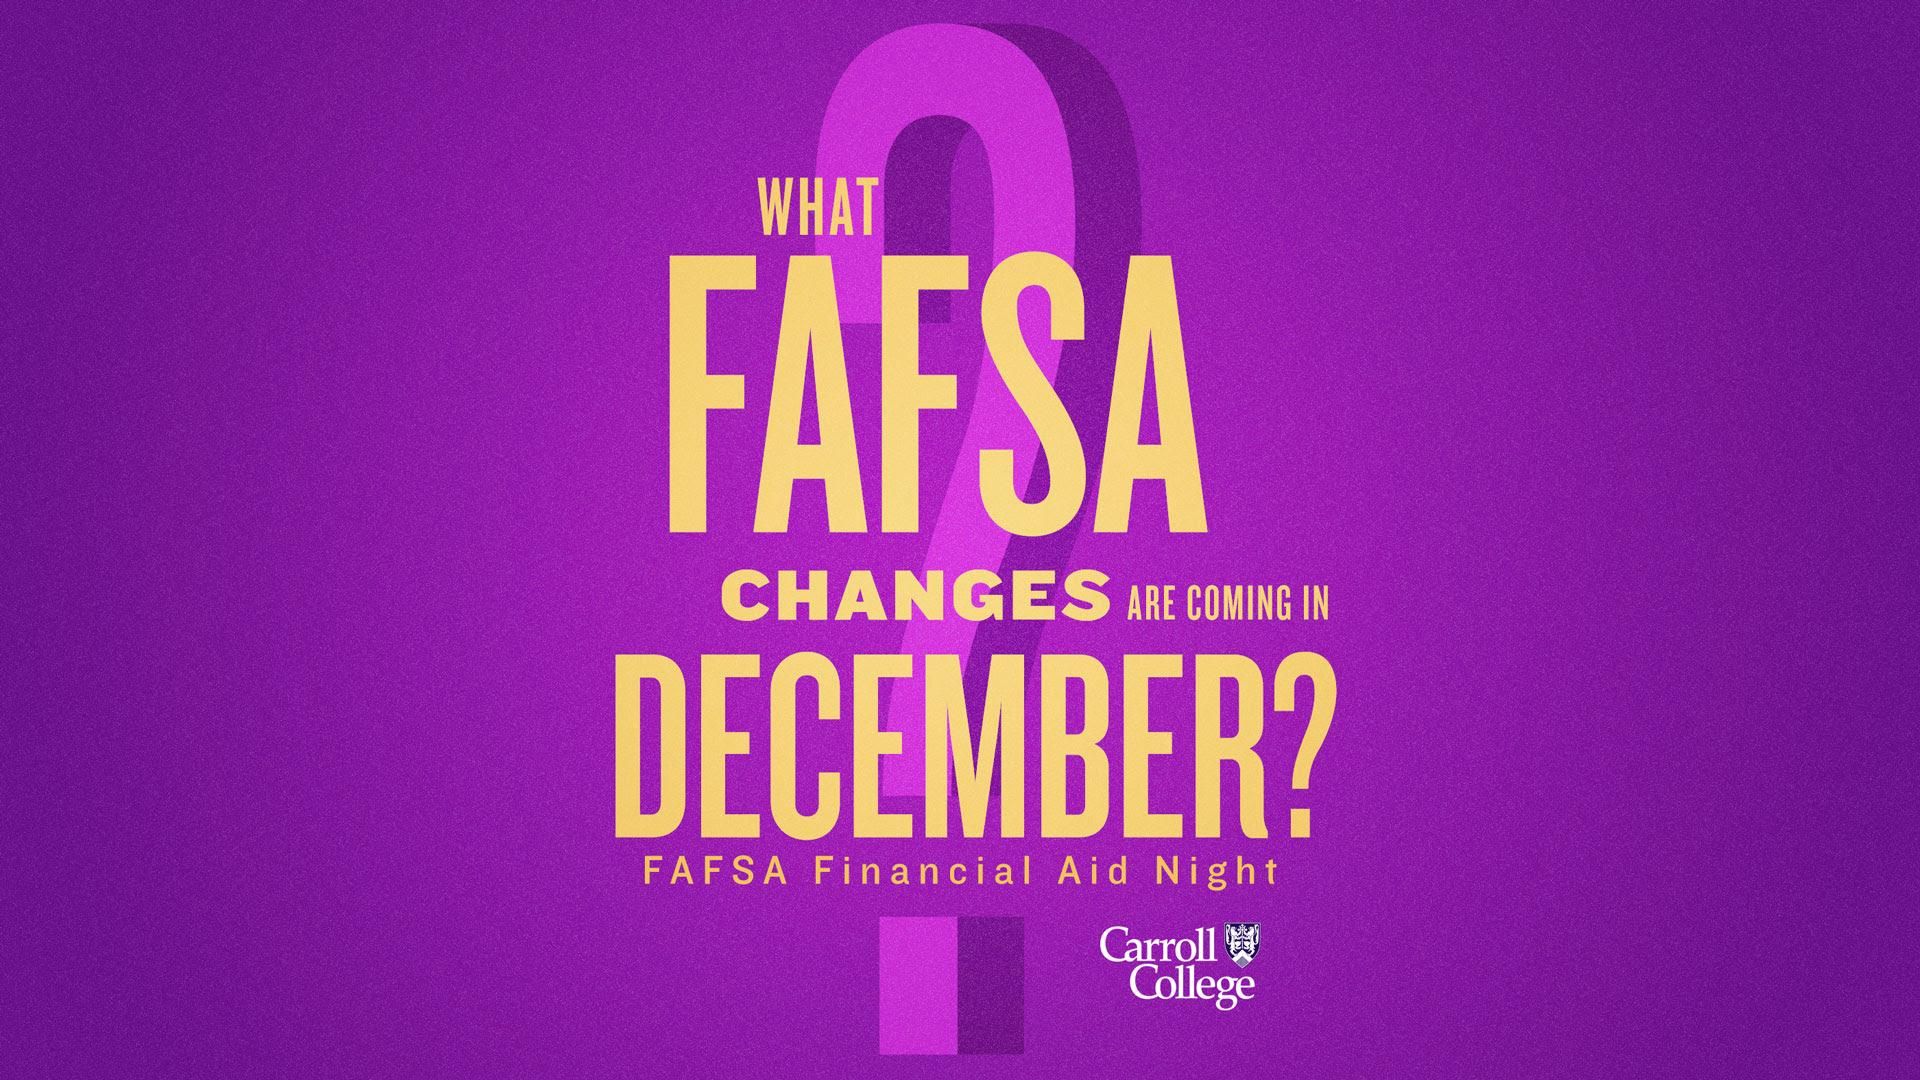 FAFSA Changes in December